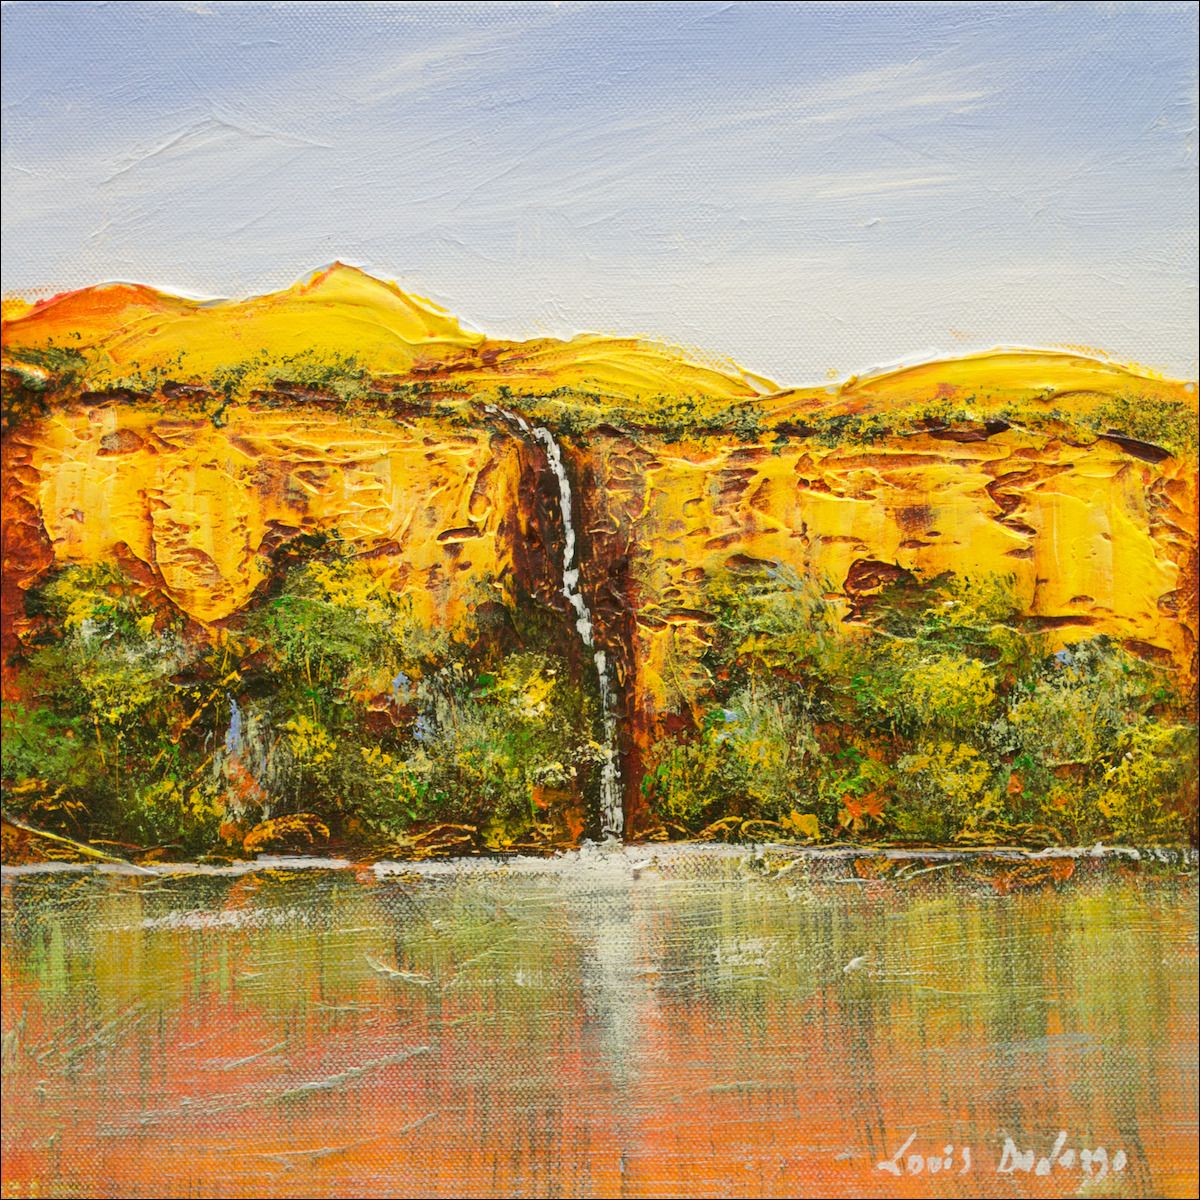 Water Reflection Landscape "After The Rain Kimberley" Original Artwork by Louis Dalozzo